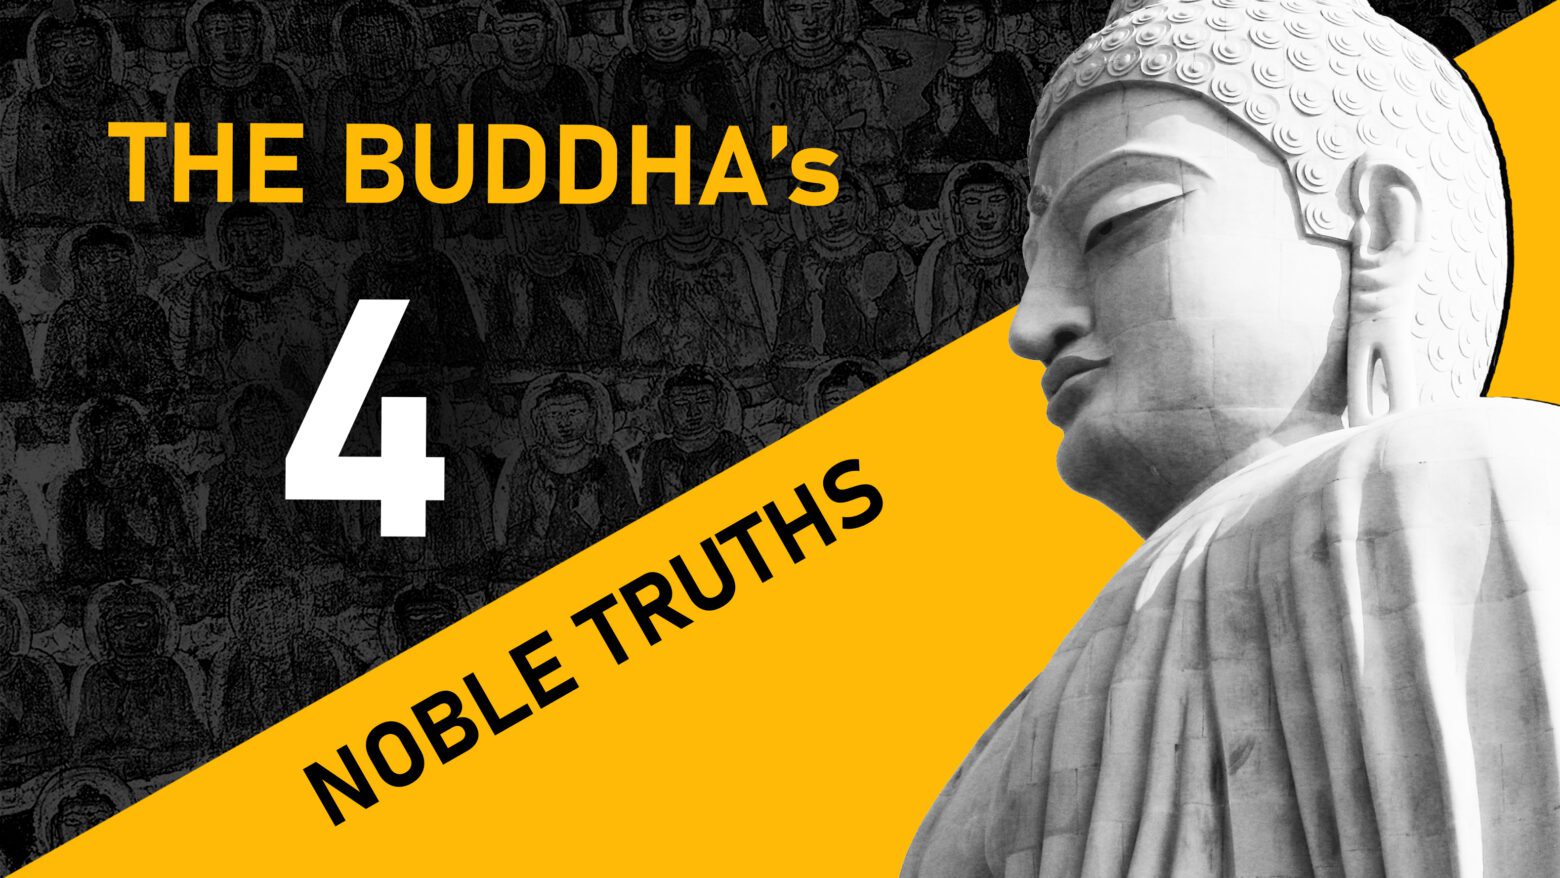 The Four Noble Truths Of Buddhism Explained